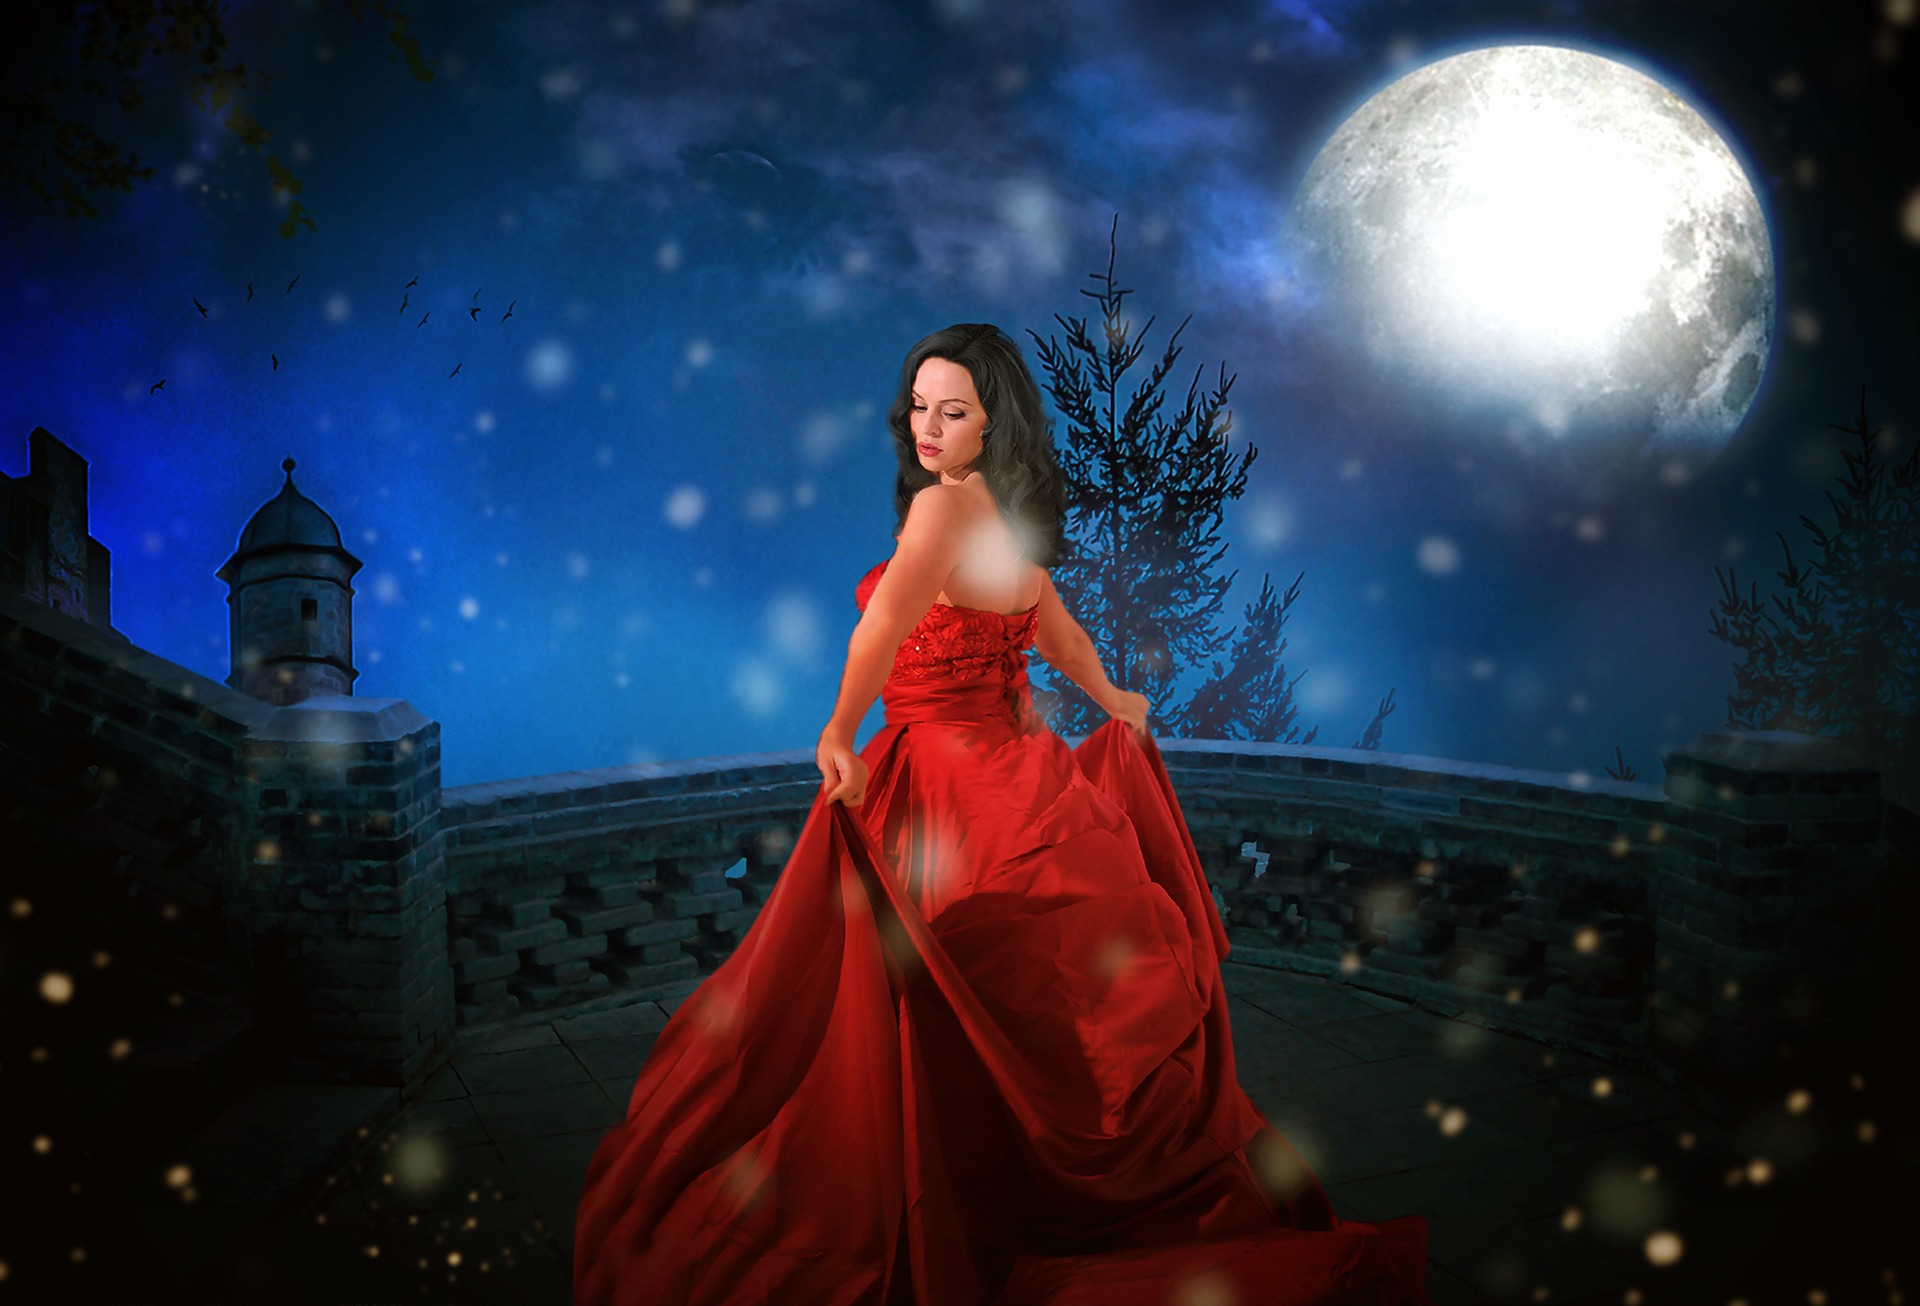 Princess in red gown with moon